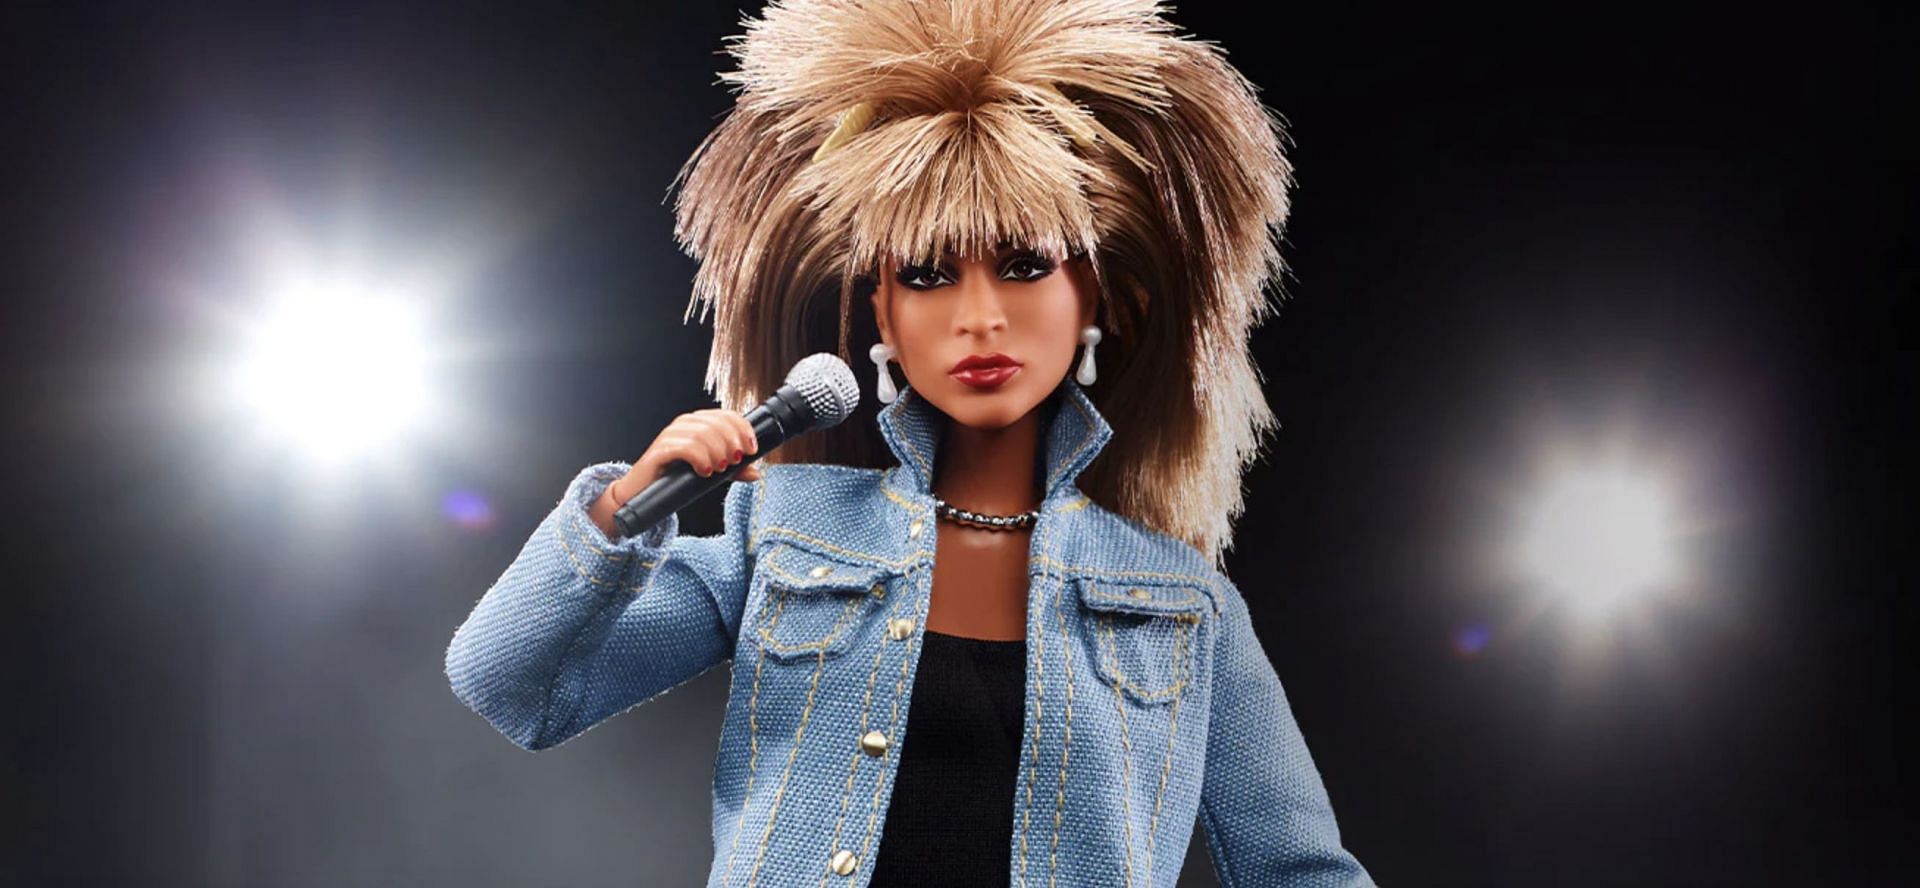 Has the Tina Turner Barbie Doll hit shelves? Details about the doll explored. (Image via Mattel)